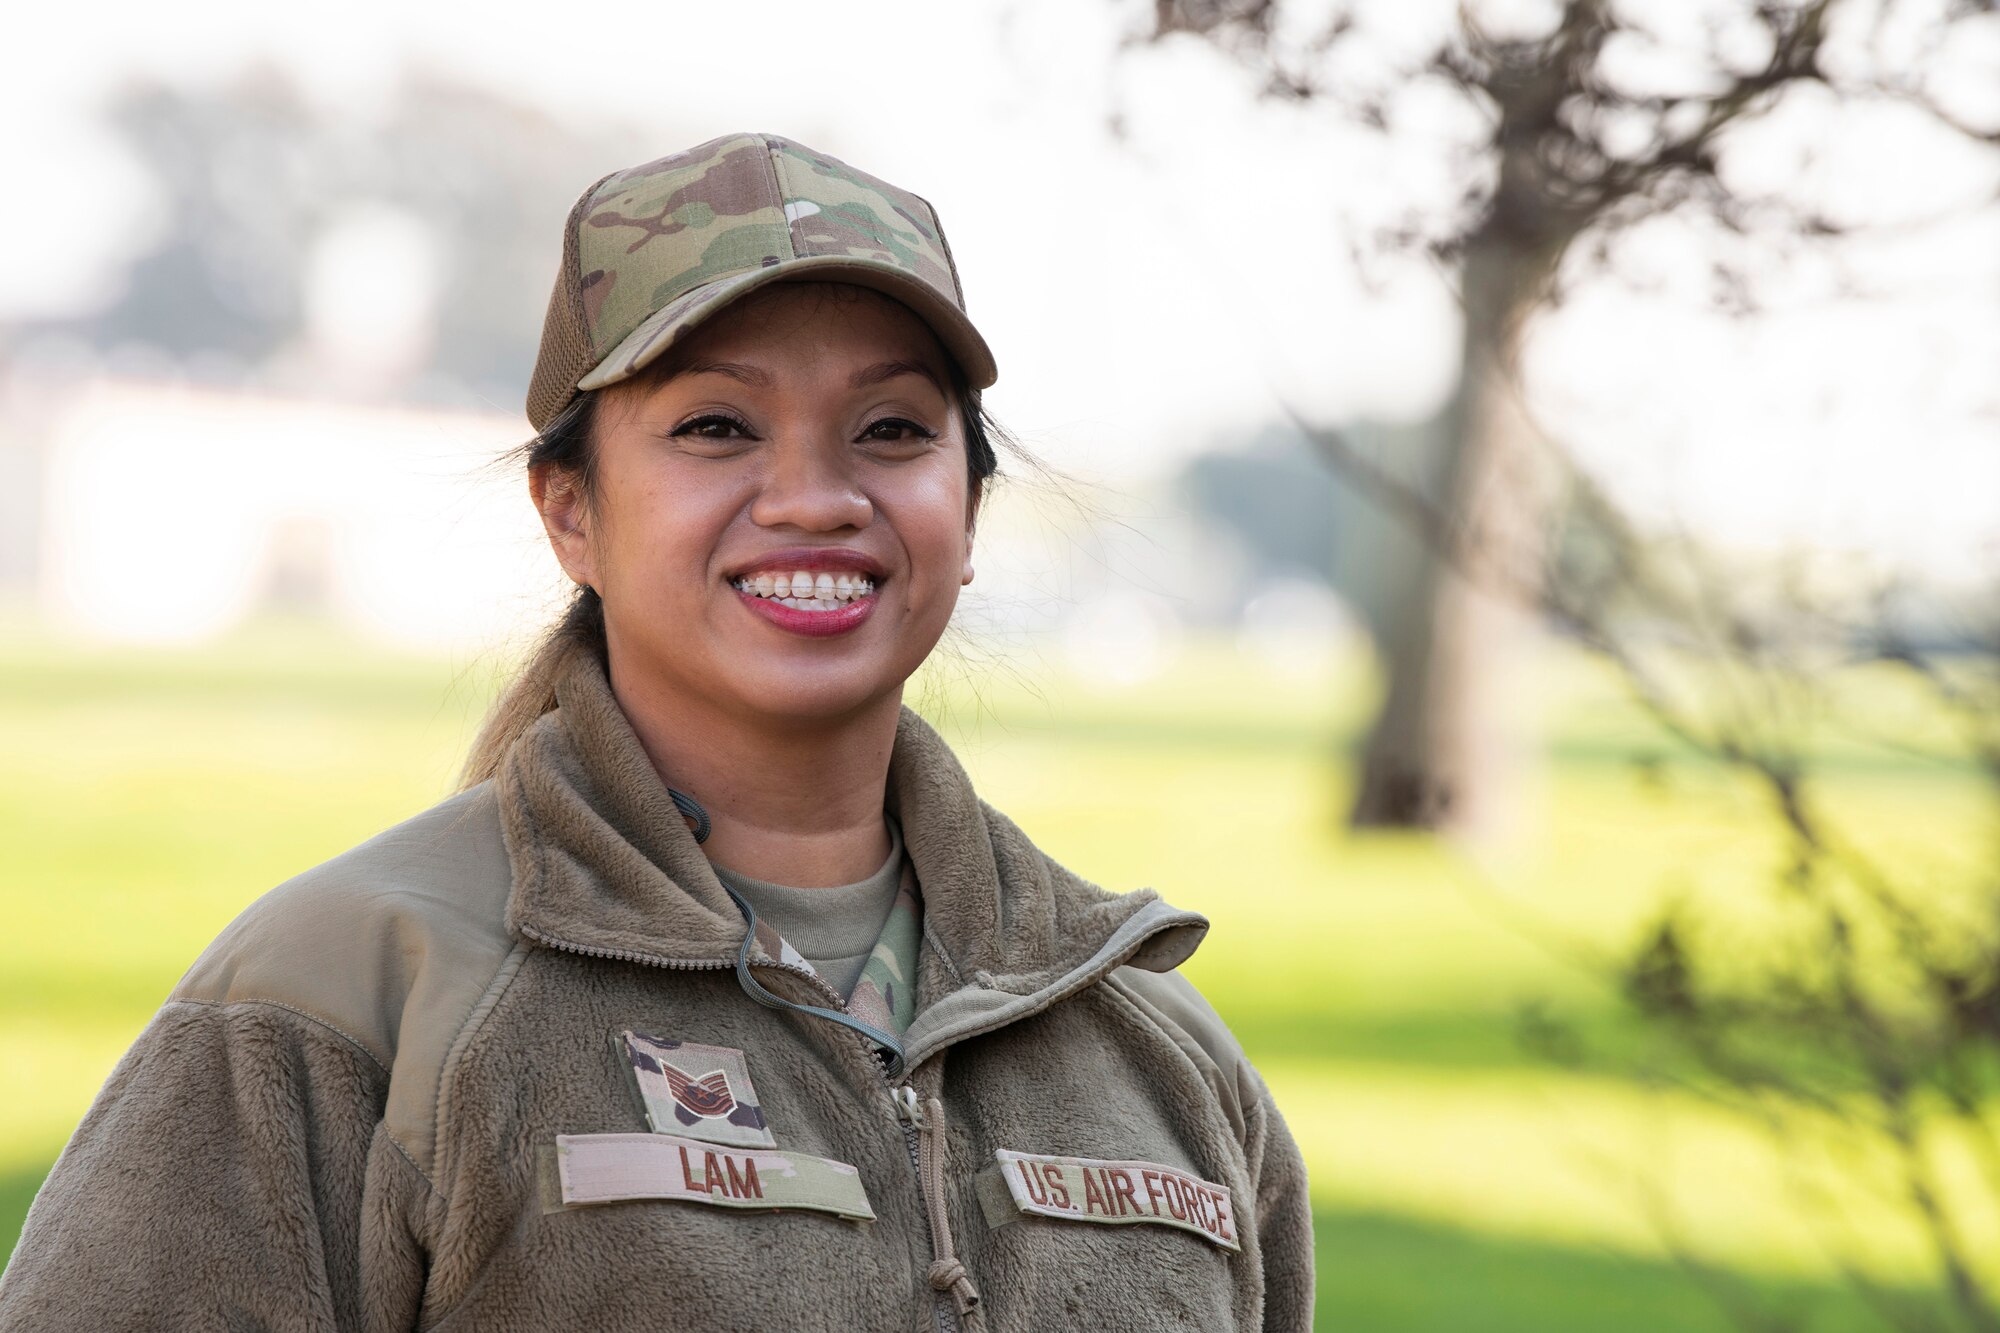 Tech Sgt. Kimmylou Lam, a Cardiopulmonary Technician with the 349th Medical Squadron at Travis Air Force Base, California, poses for a photo prior to departing on a mission supporting COVID-19 relief in New York, Feb. 4, 2022 (U.S. Air Force photo by Grant Okubo)